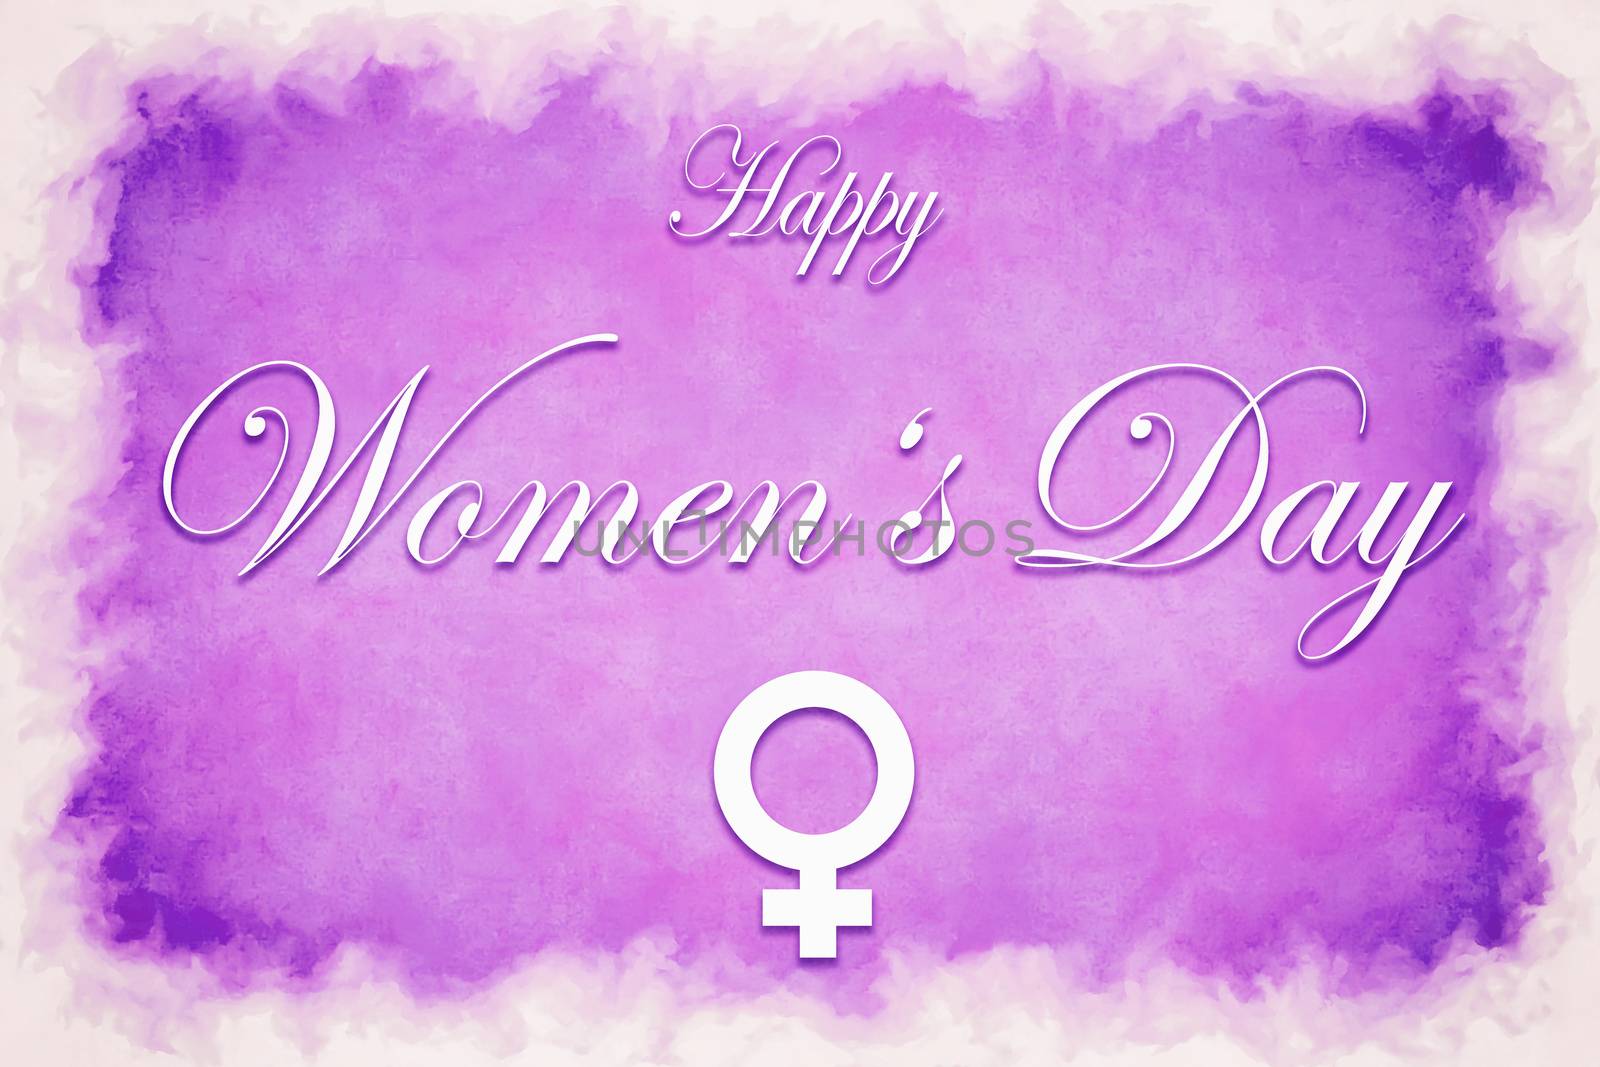 Illustration card with text Happy Women's Day by w20er